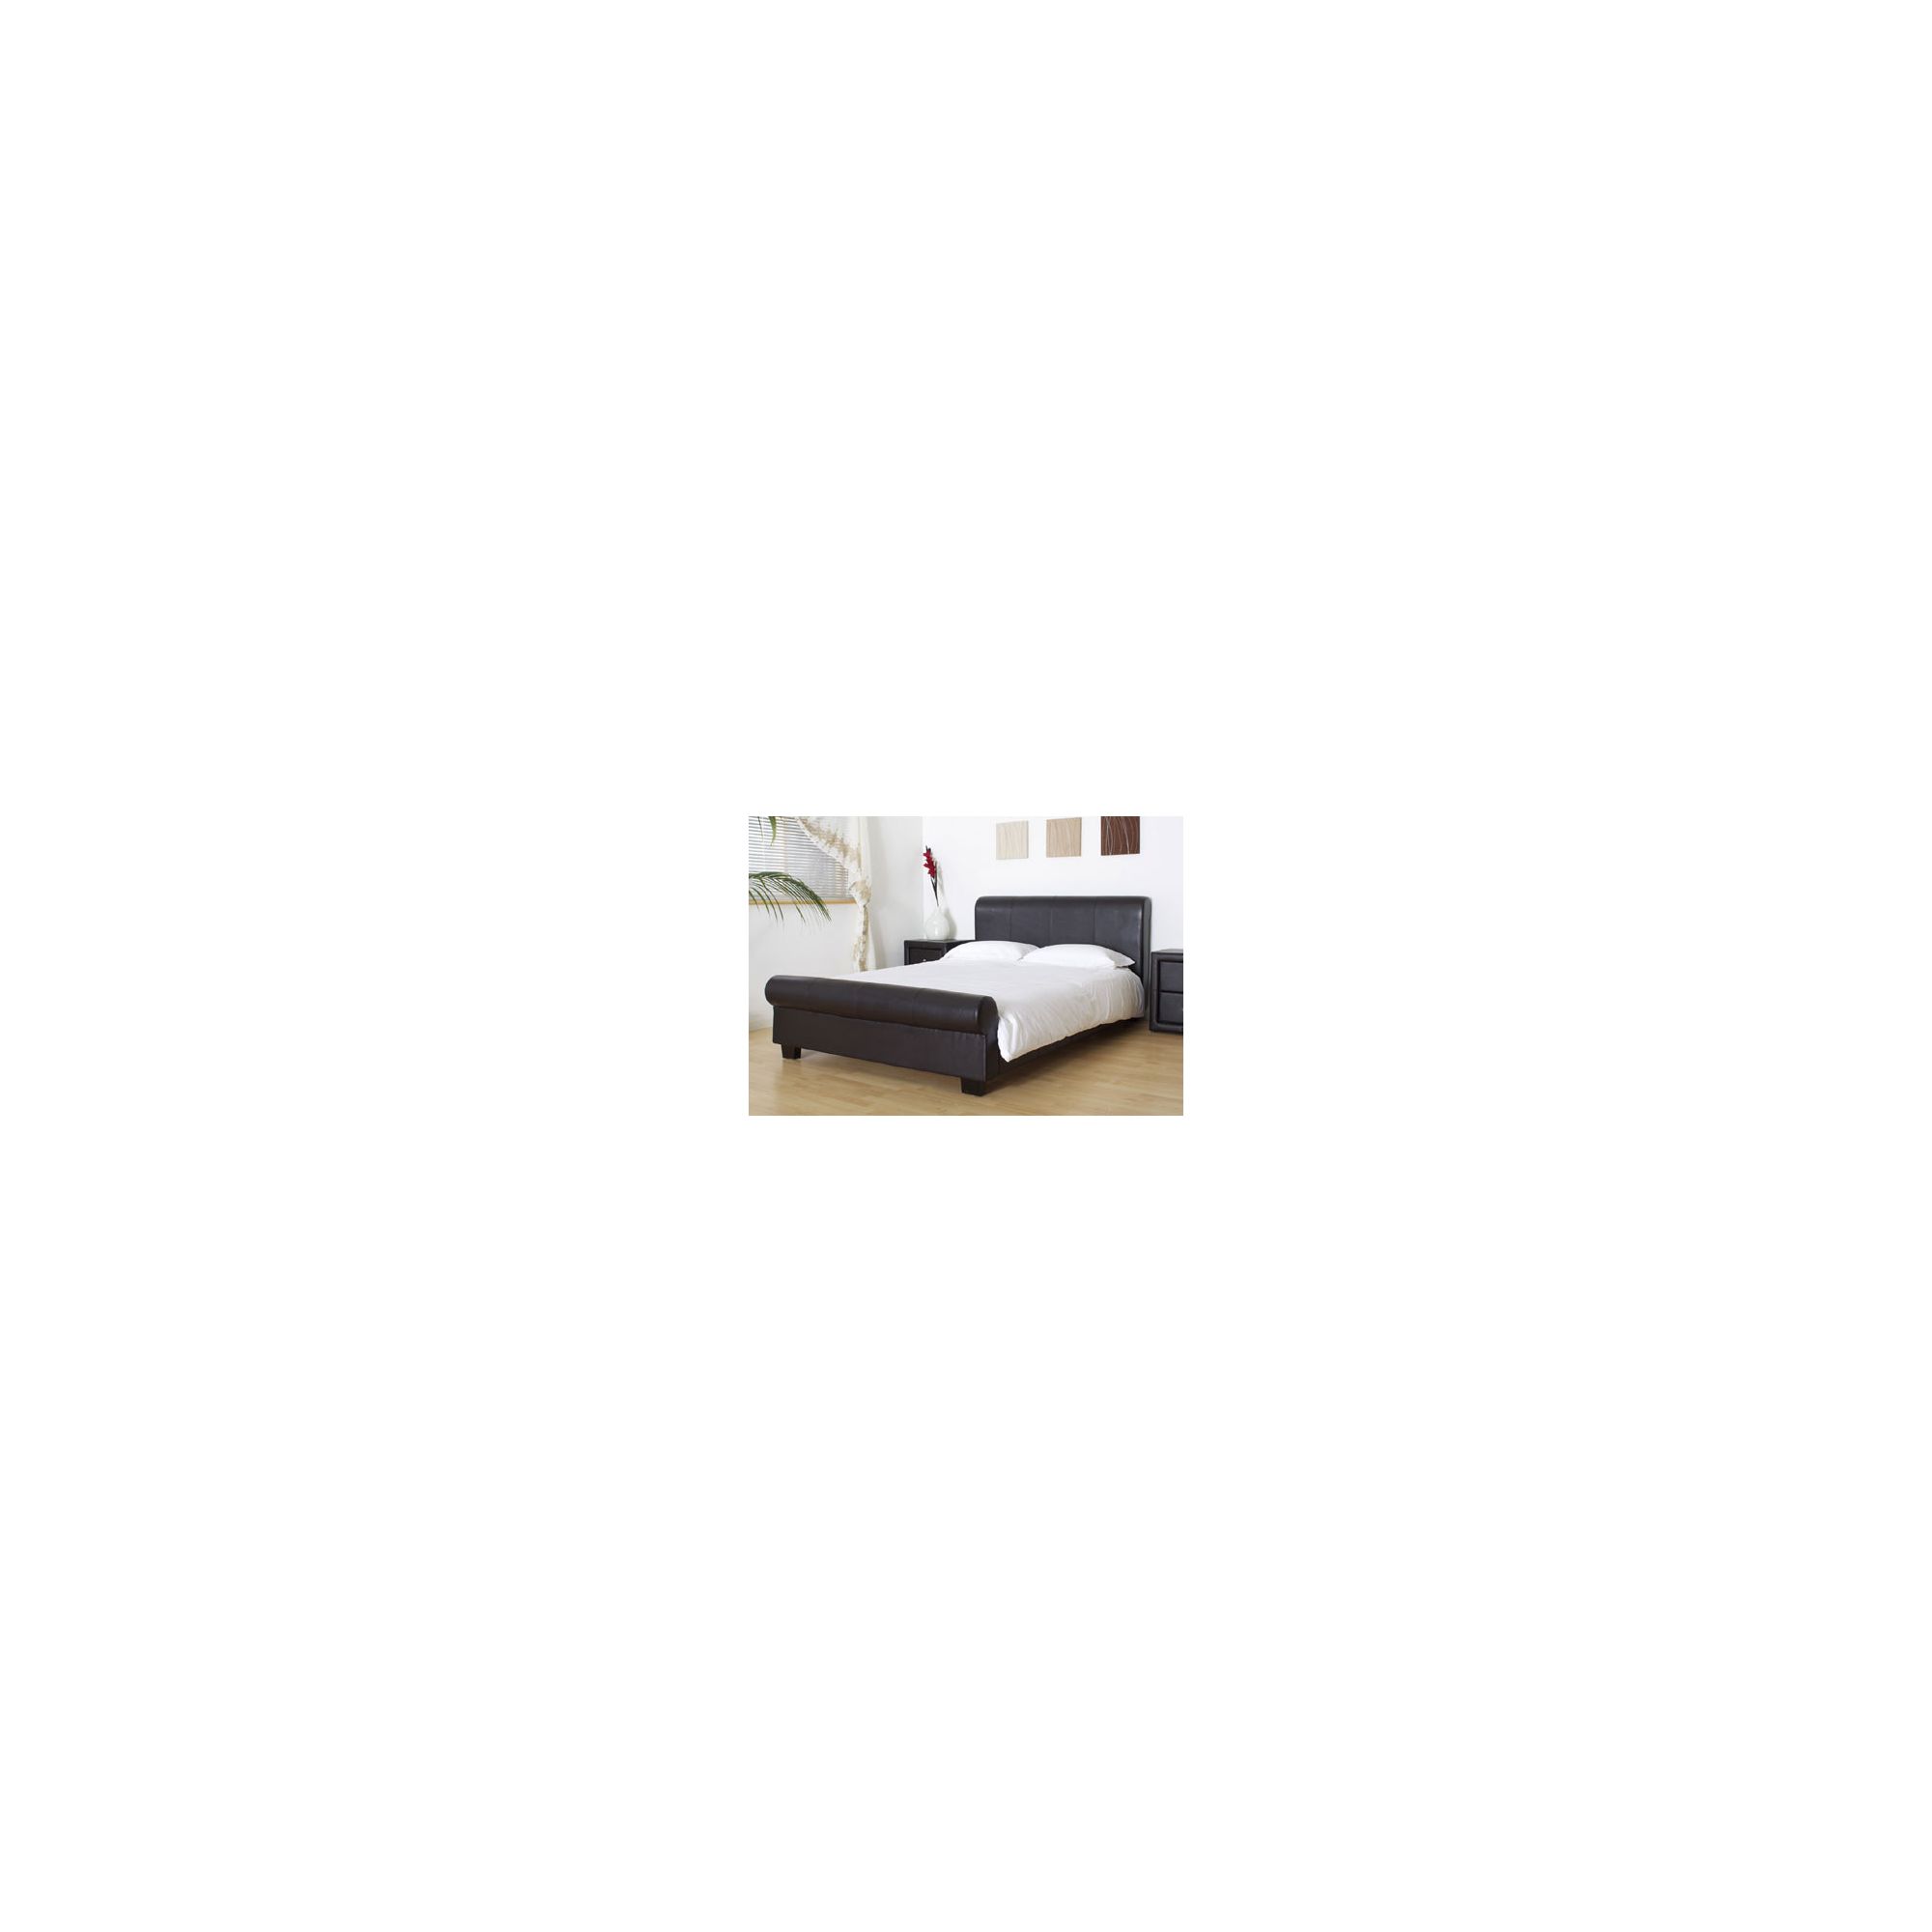 Alpha furniture Marseille Real Leather Bed - Black - Double at Tesco Direct